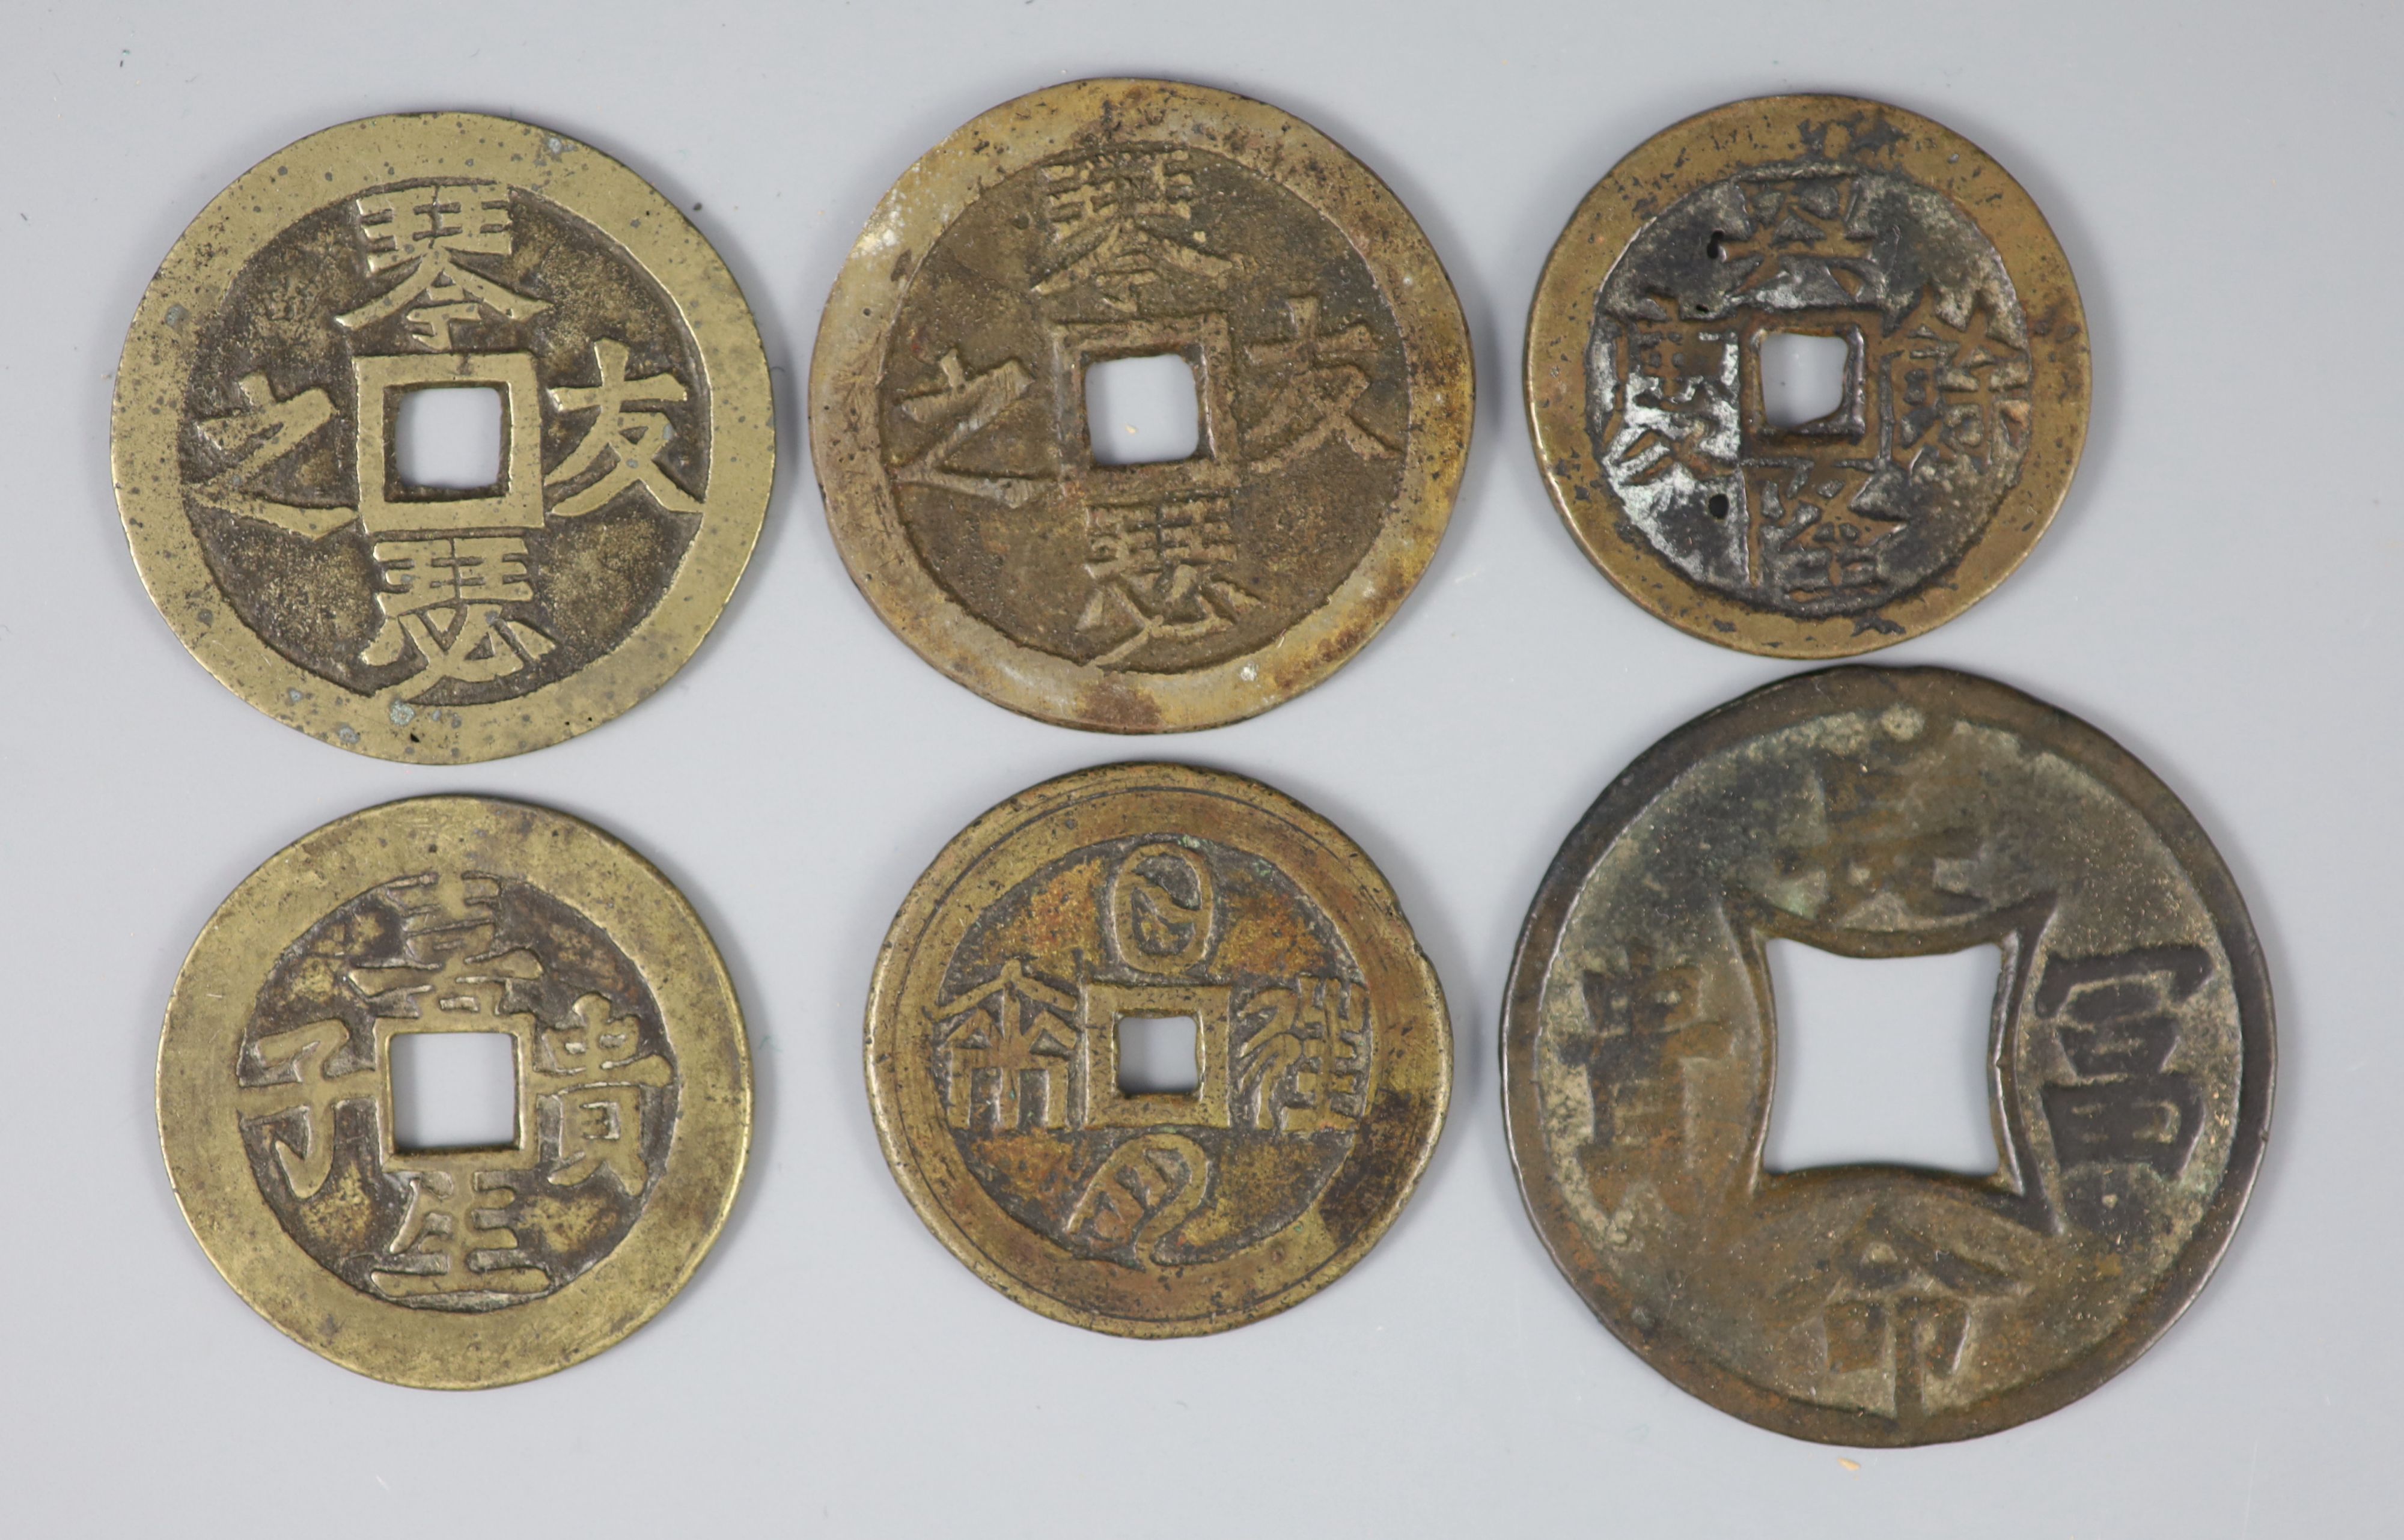 China, 6 bronze or copper charms or amulets, Qing dynasty, five inscribed with four characters to